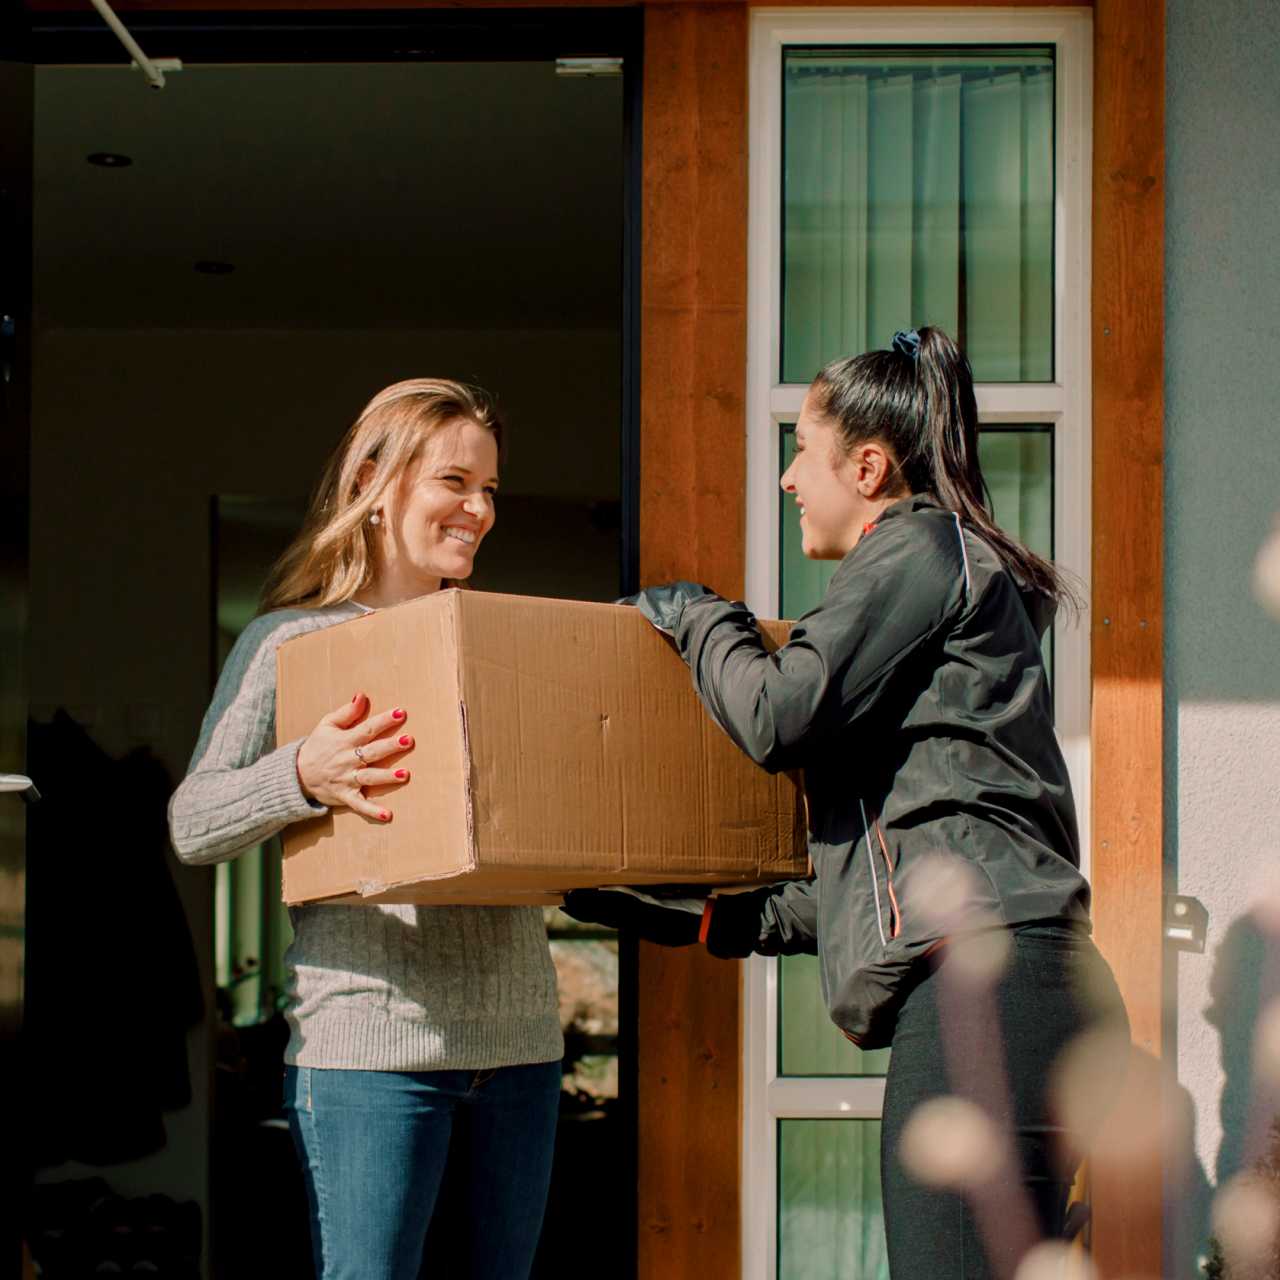 Image of a delivery woman handing another woman a package.